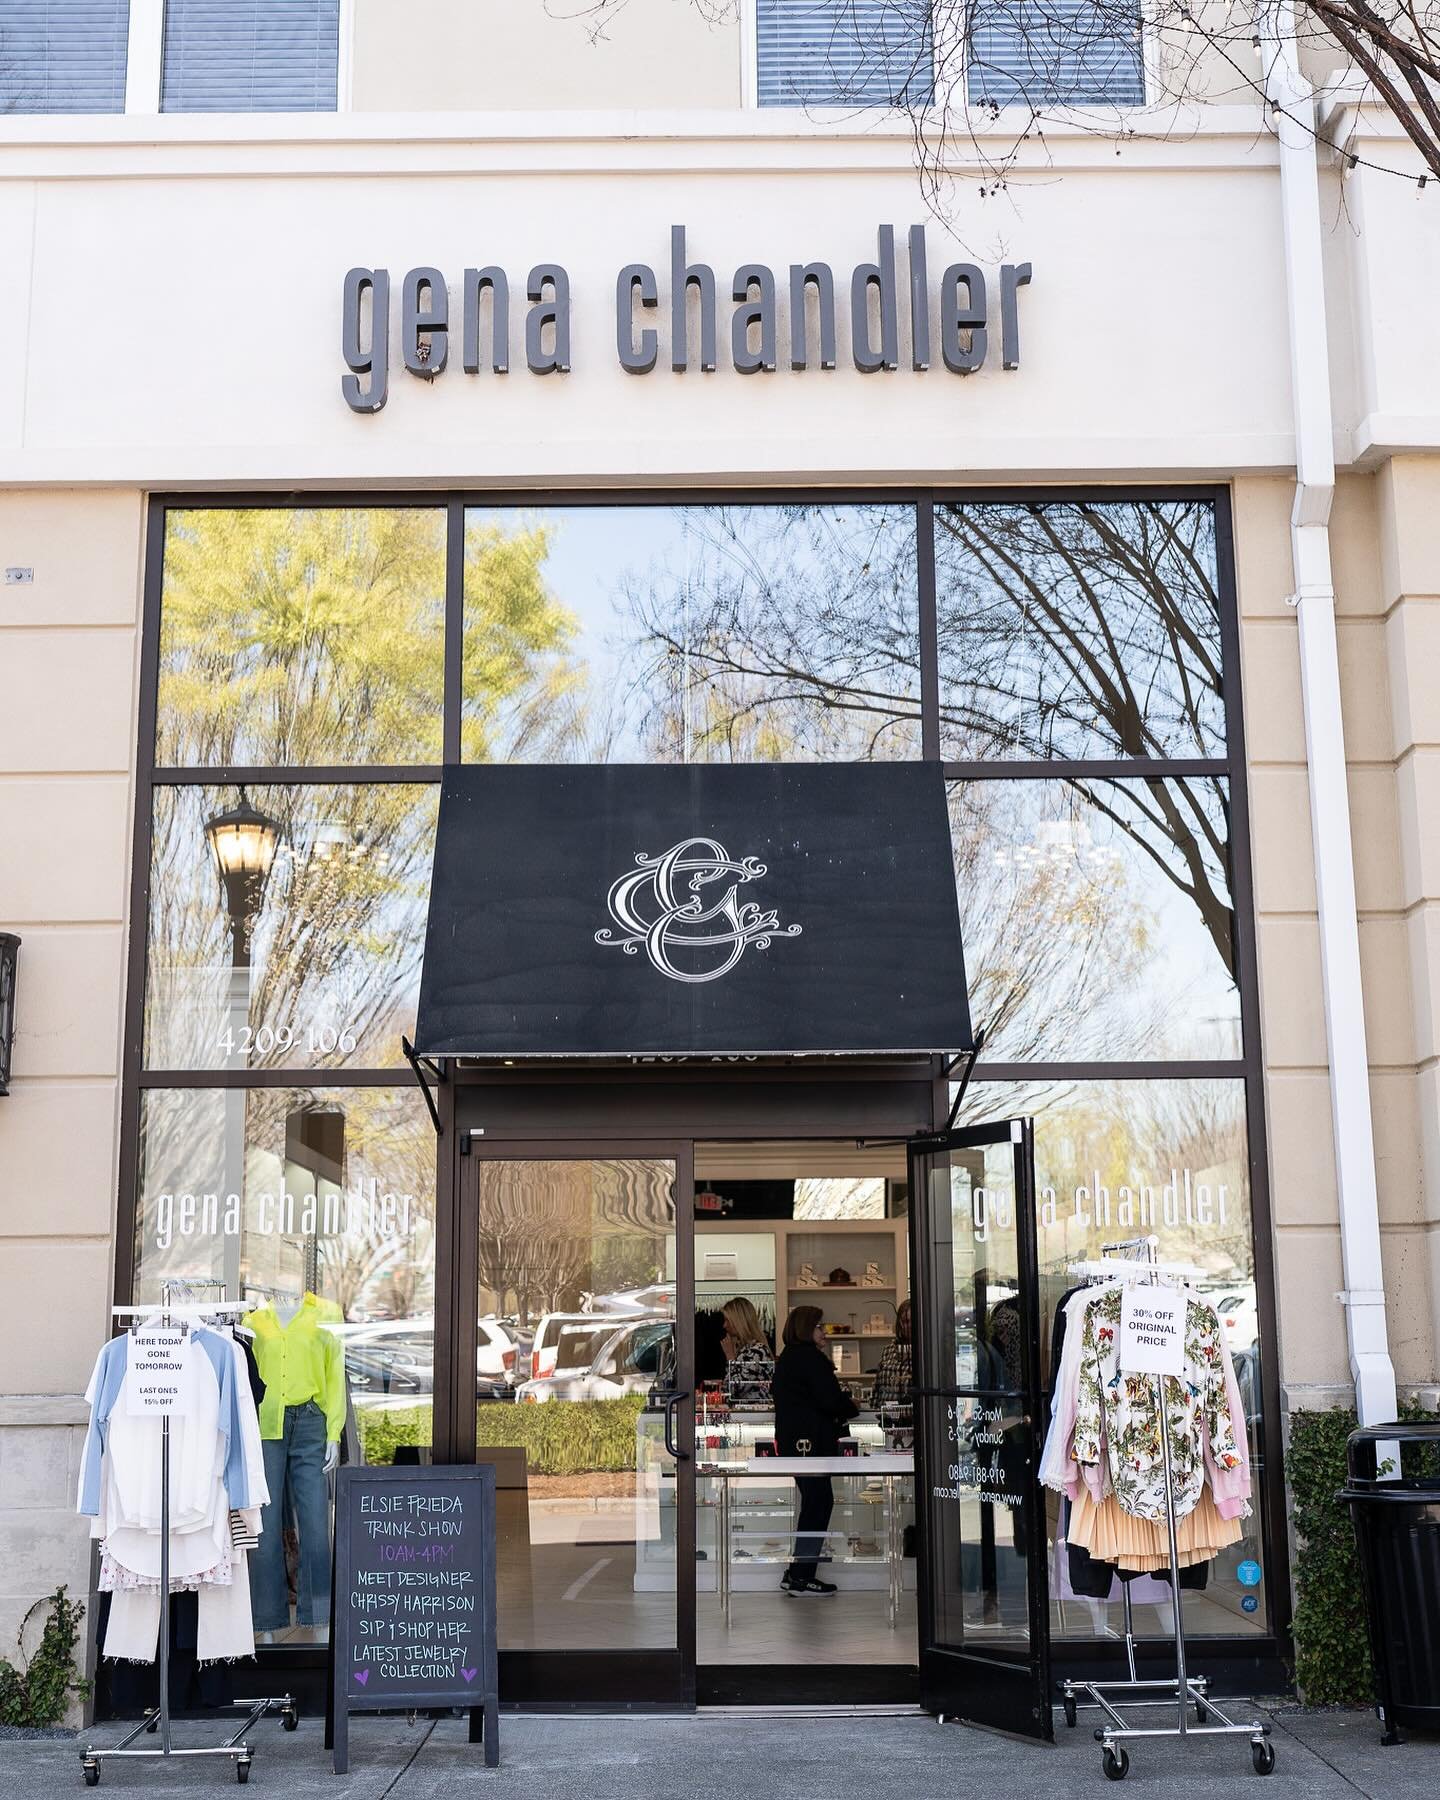 Cheers to 1 year! 🎉 Join Ashley and Natalie as they celebrate their one year anniversary with @genachandler this week! Enjoy special surprises, discounts, sweet treats and champagne on Thursday from 3pm to 7pm and Friday from 12pm to 4pm! 💜 #shopLo